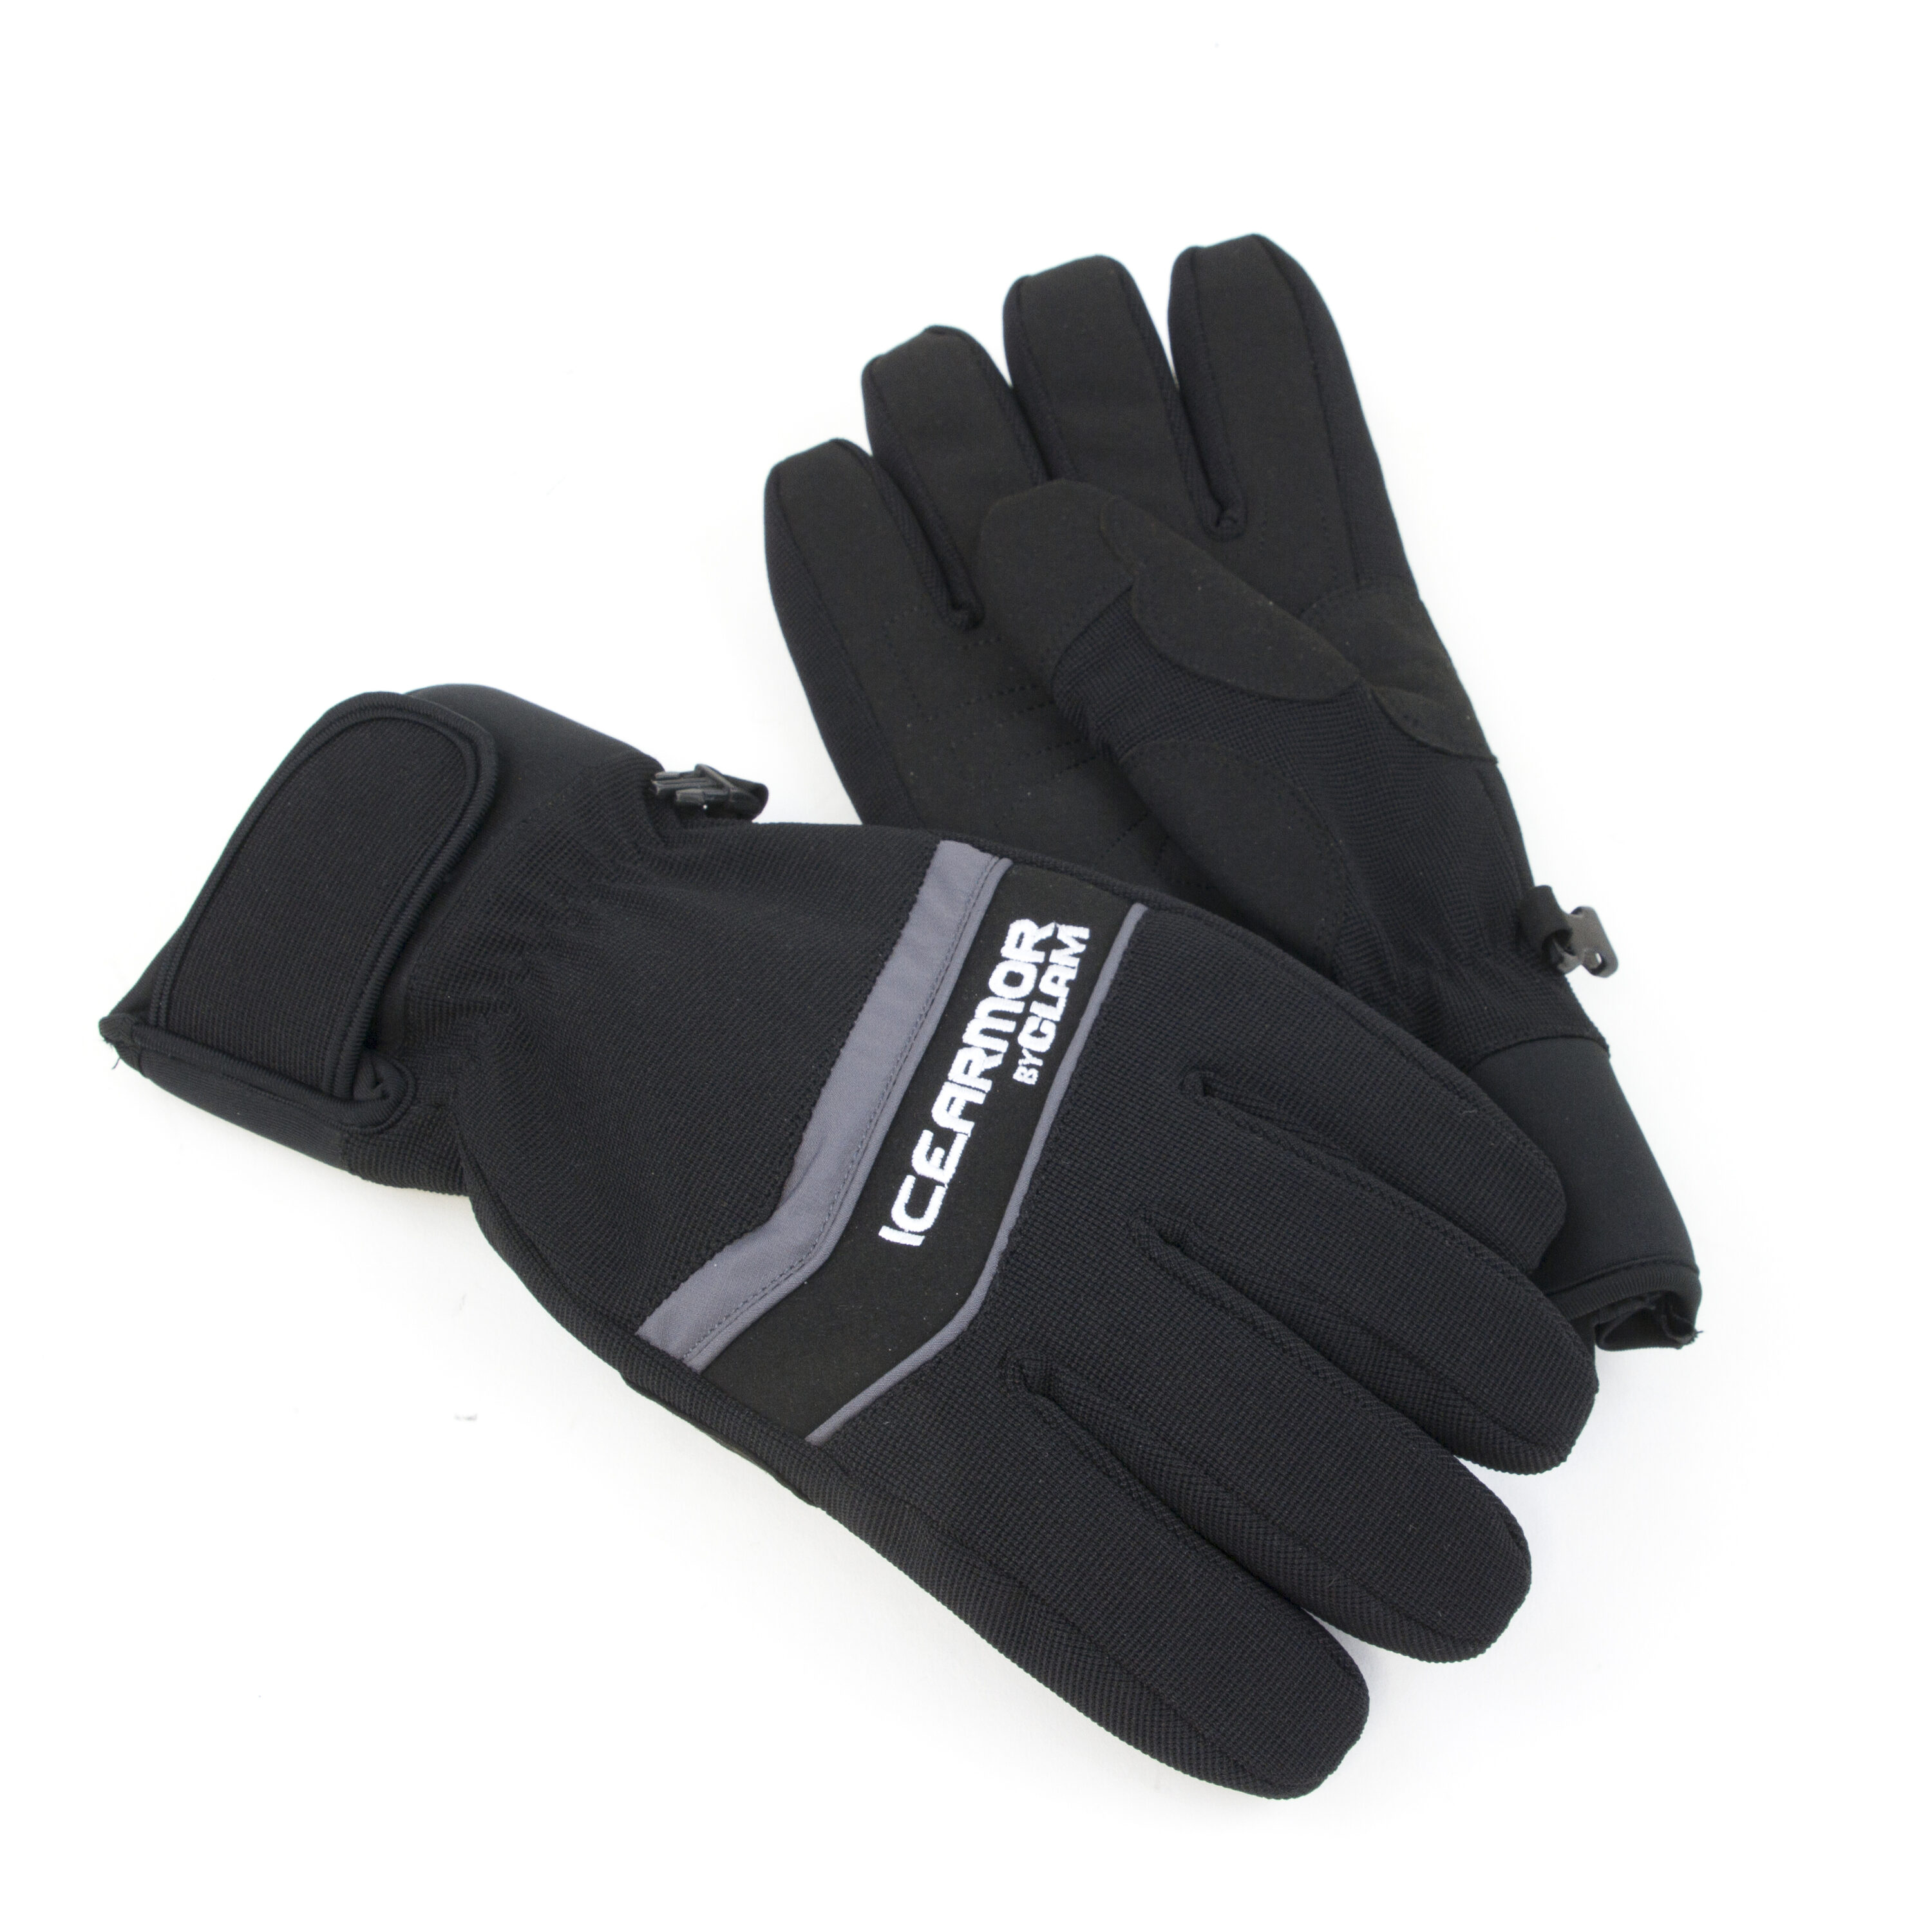 Clam Outdoors Edge Men's Ice Fishing Gloves - Black, Adult L/XL